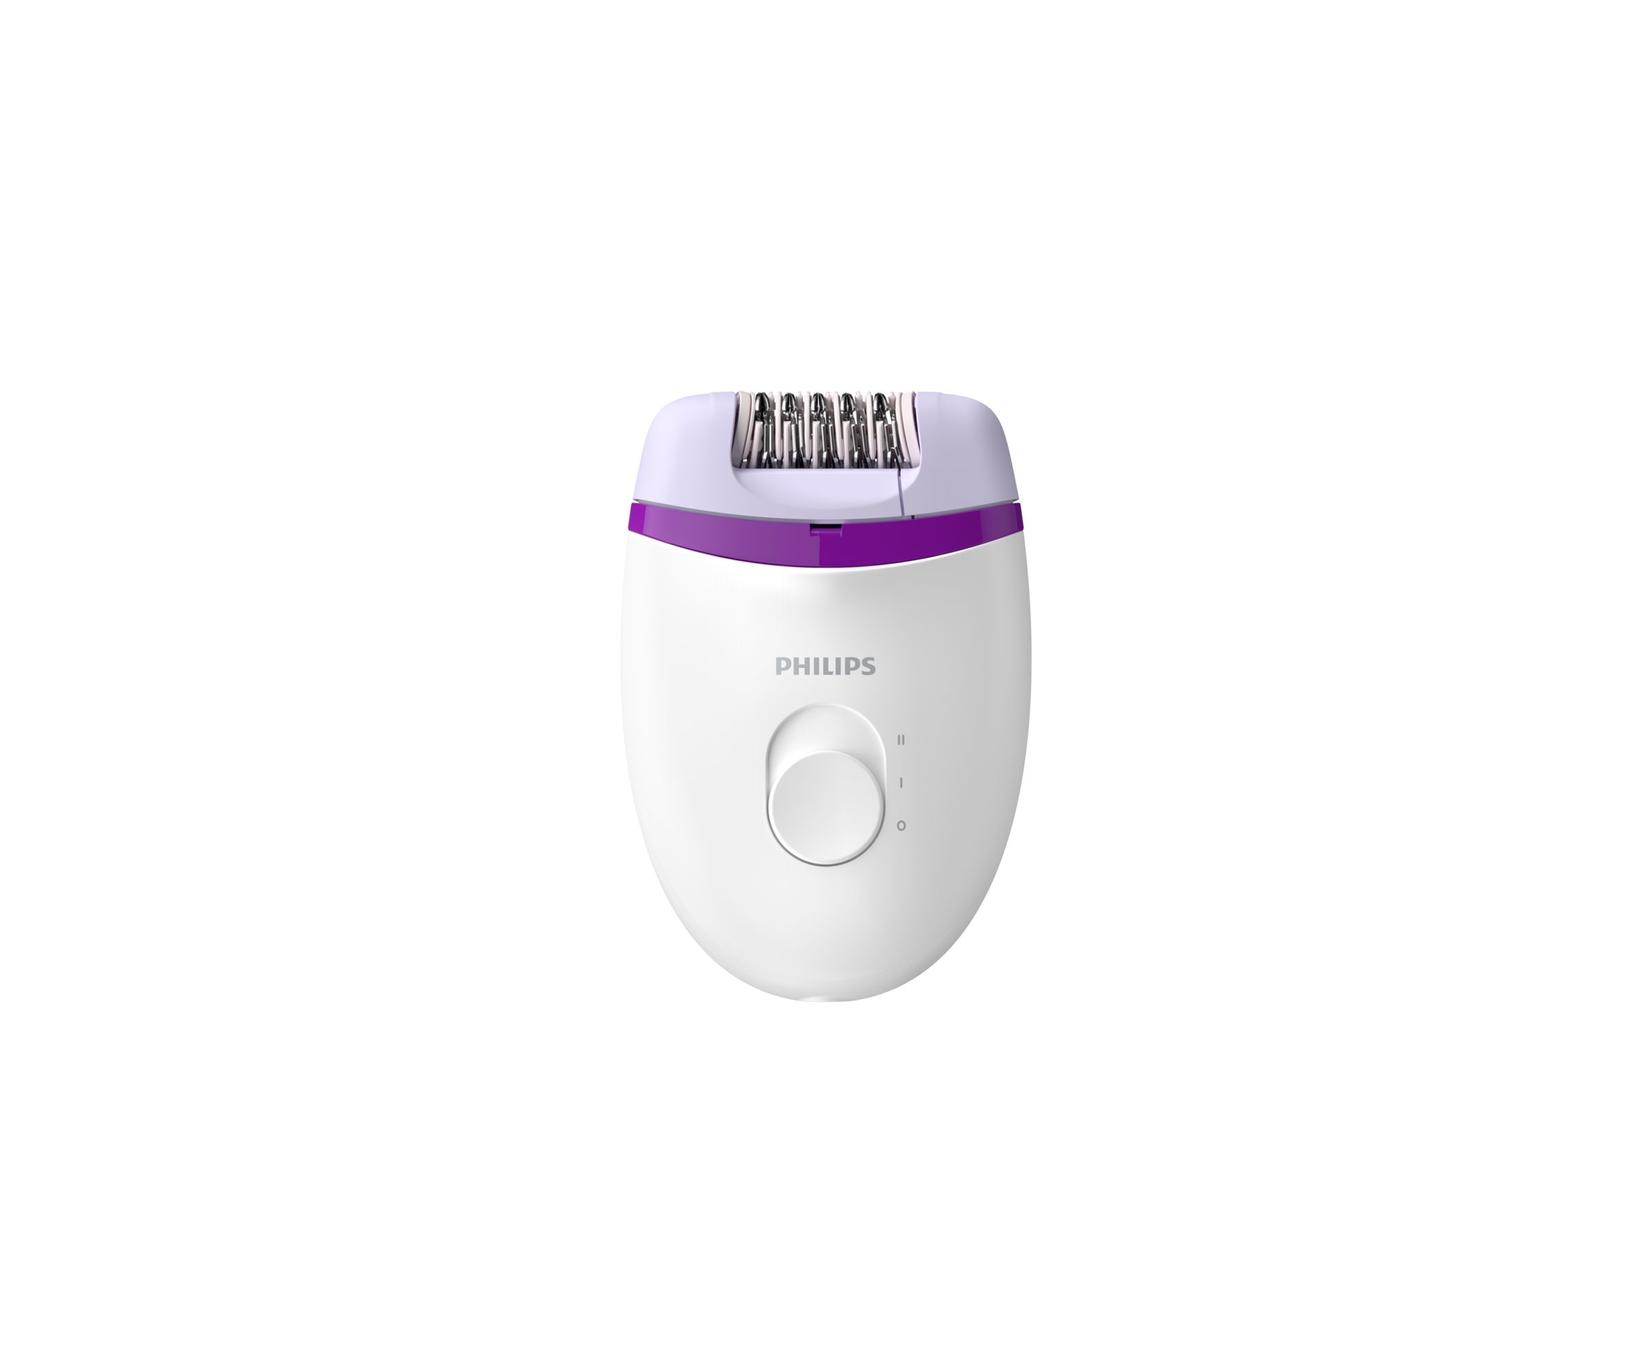 Selected image for Philips Epilator BRE225/00